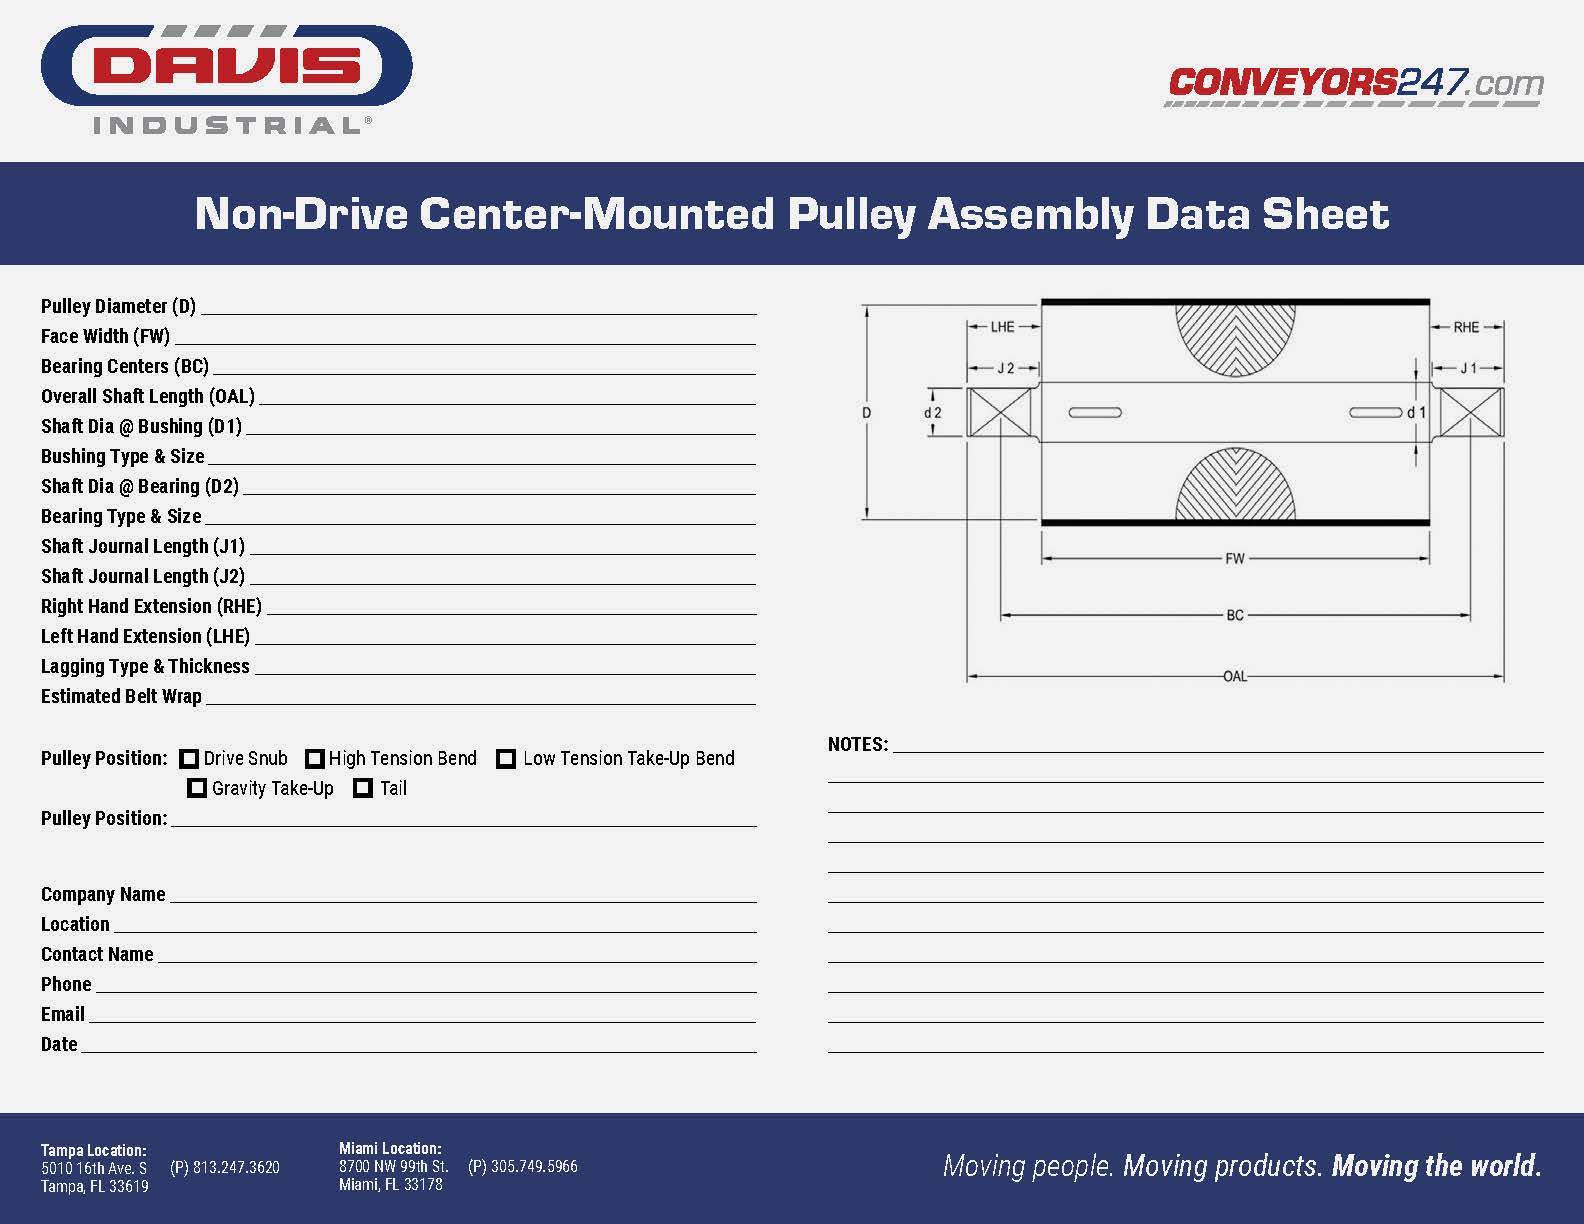 Davis_Non-Drive Center-Mounted Pulley Assembly_Data Sheet